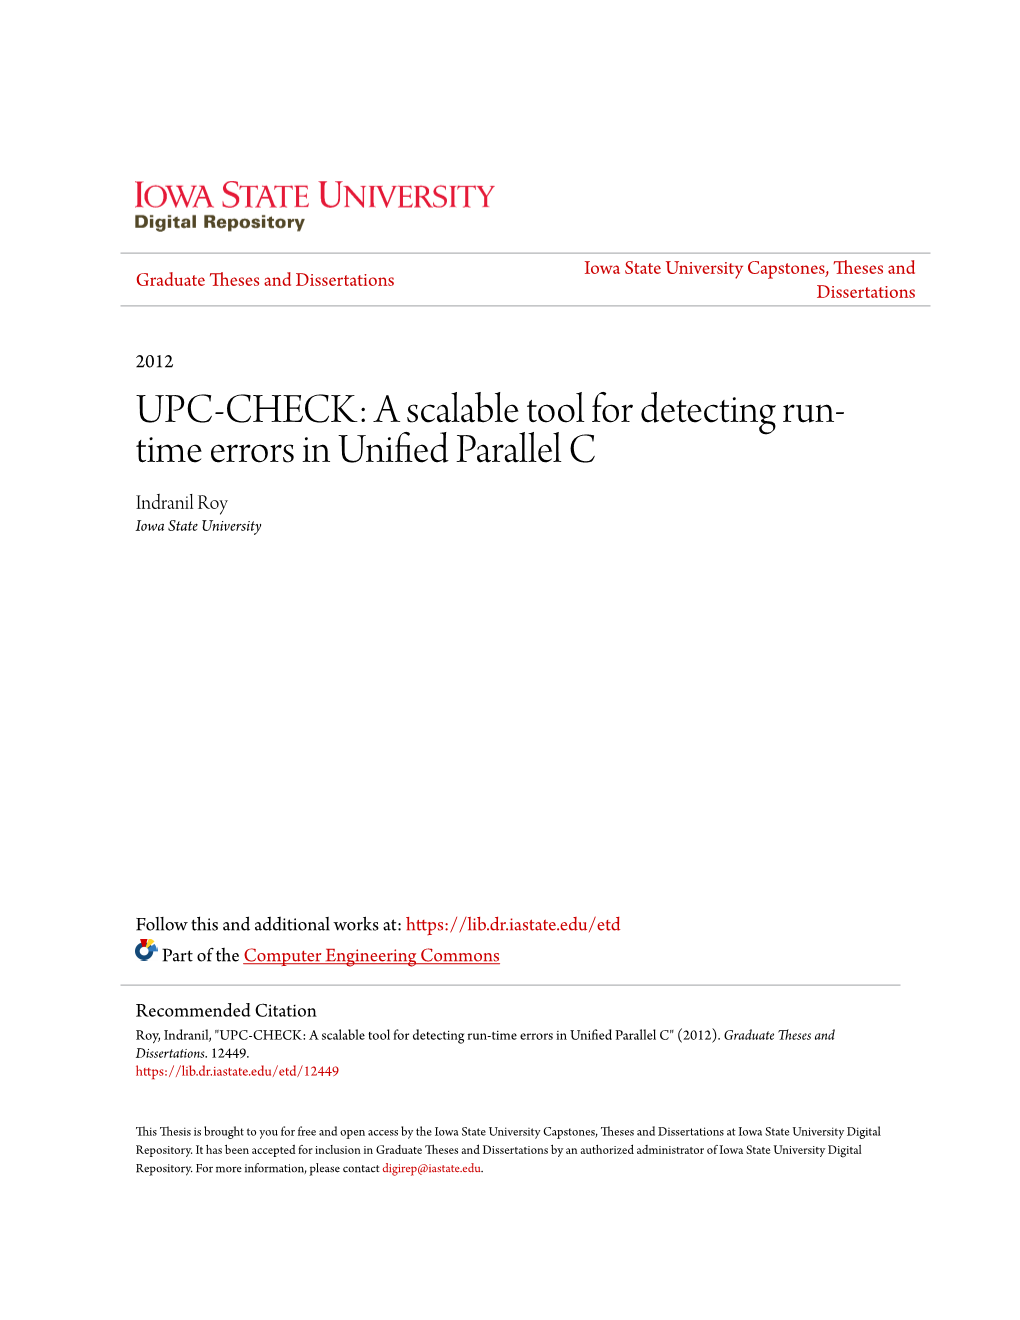 UPC-CHECK: a Scalable Tool for Detecting Run- Time Errors in Unified Ap Rallel C Indranil Roy Iowa State University